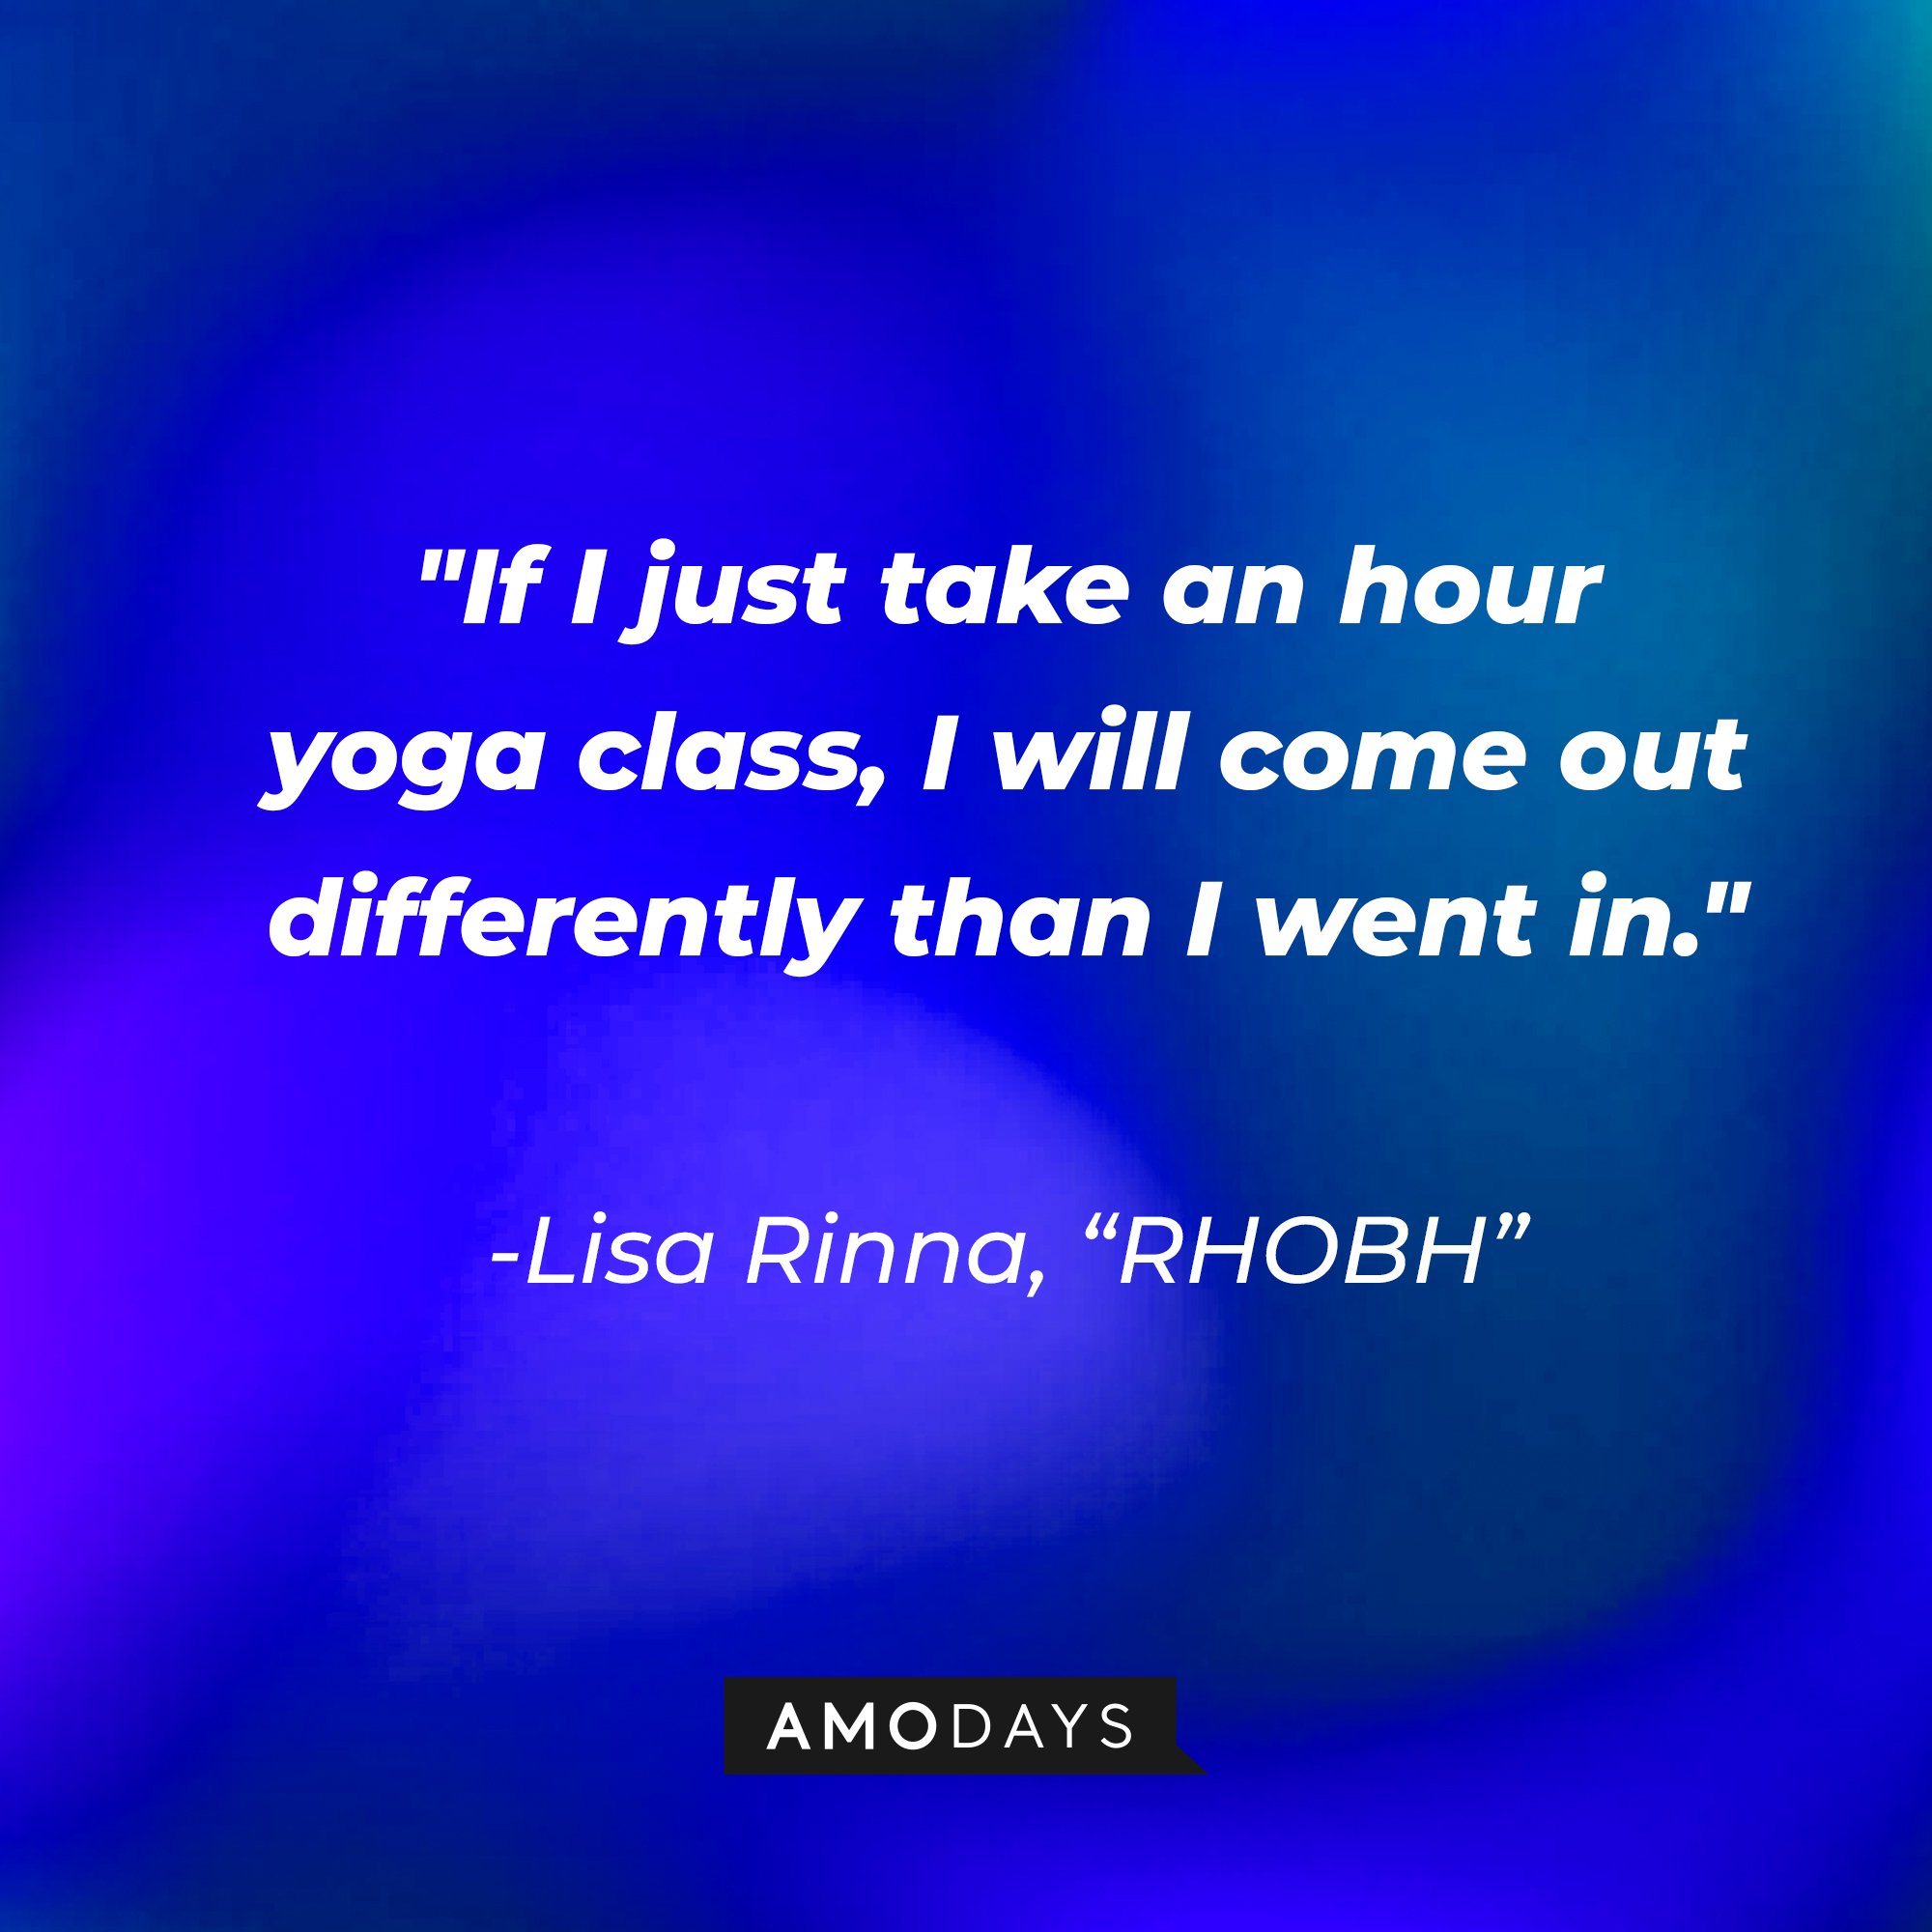 Lisa Rinna's quote from "The Real Housewives of Beverly Hills:" "If I just take an hour yoga class, I will come out differently than I went in." | Source: AmoDays